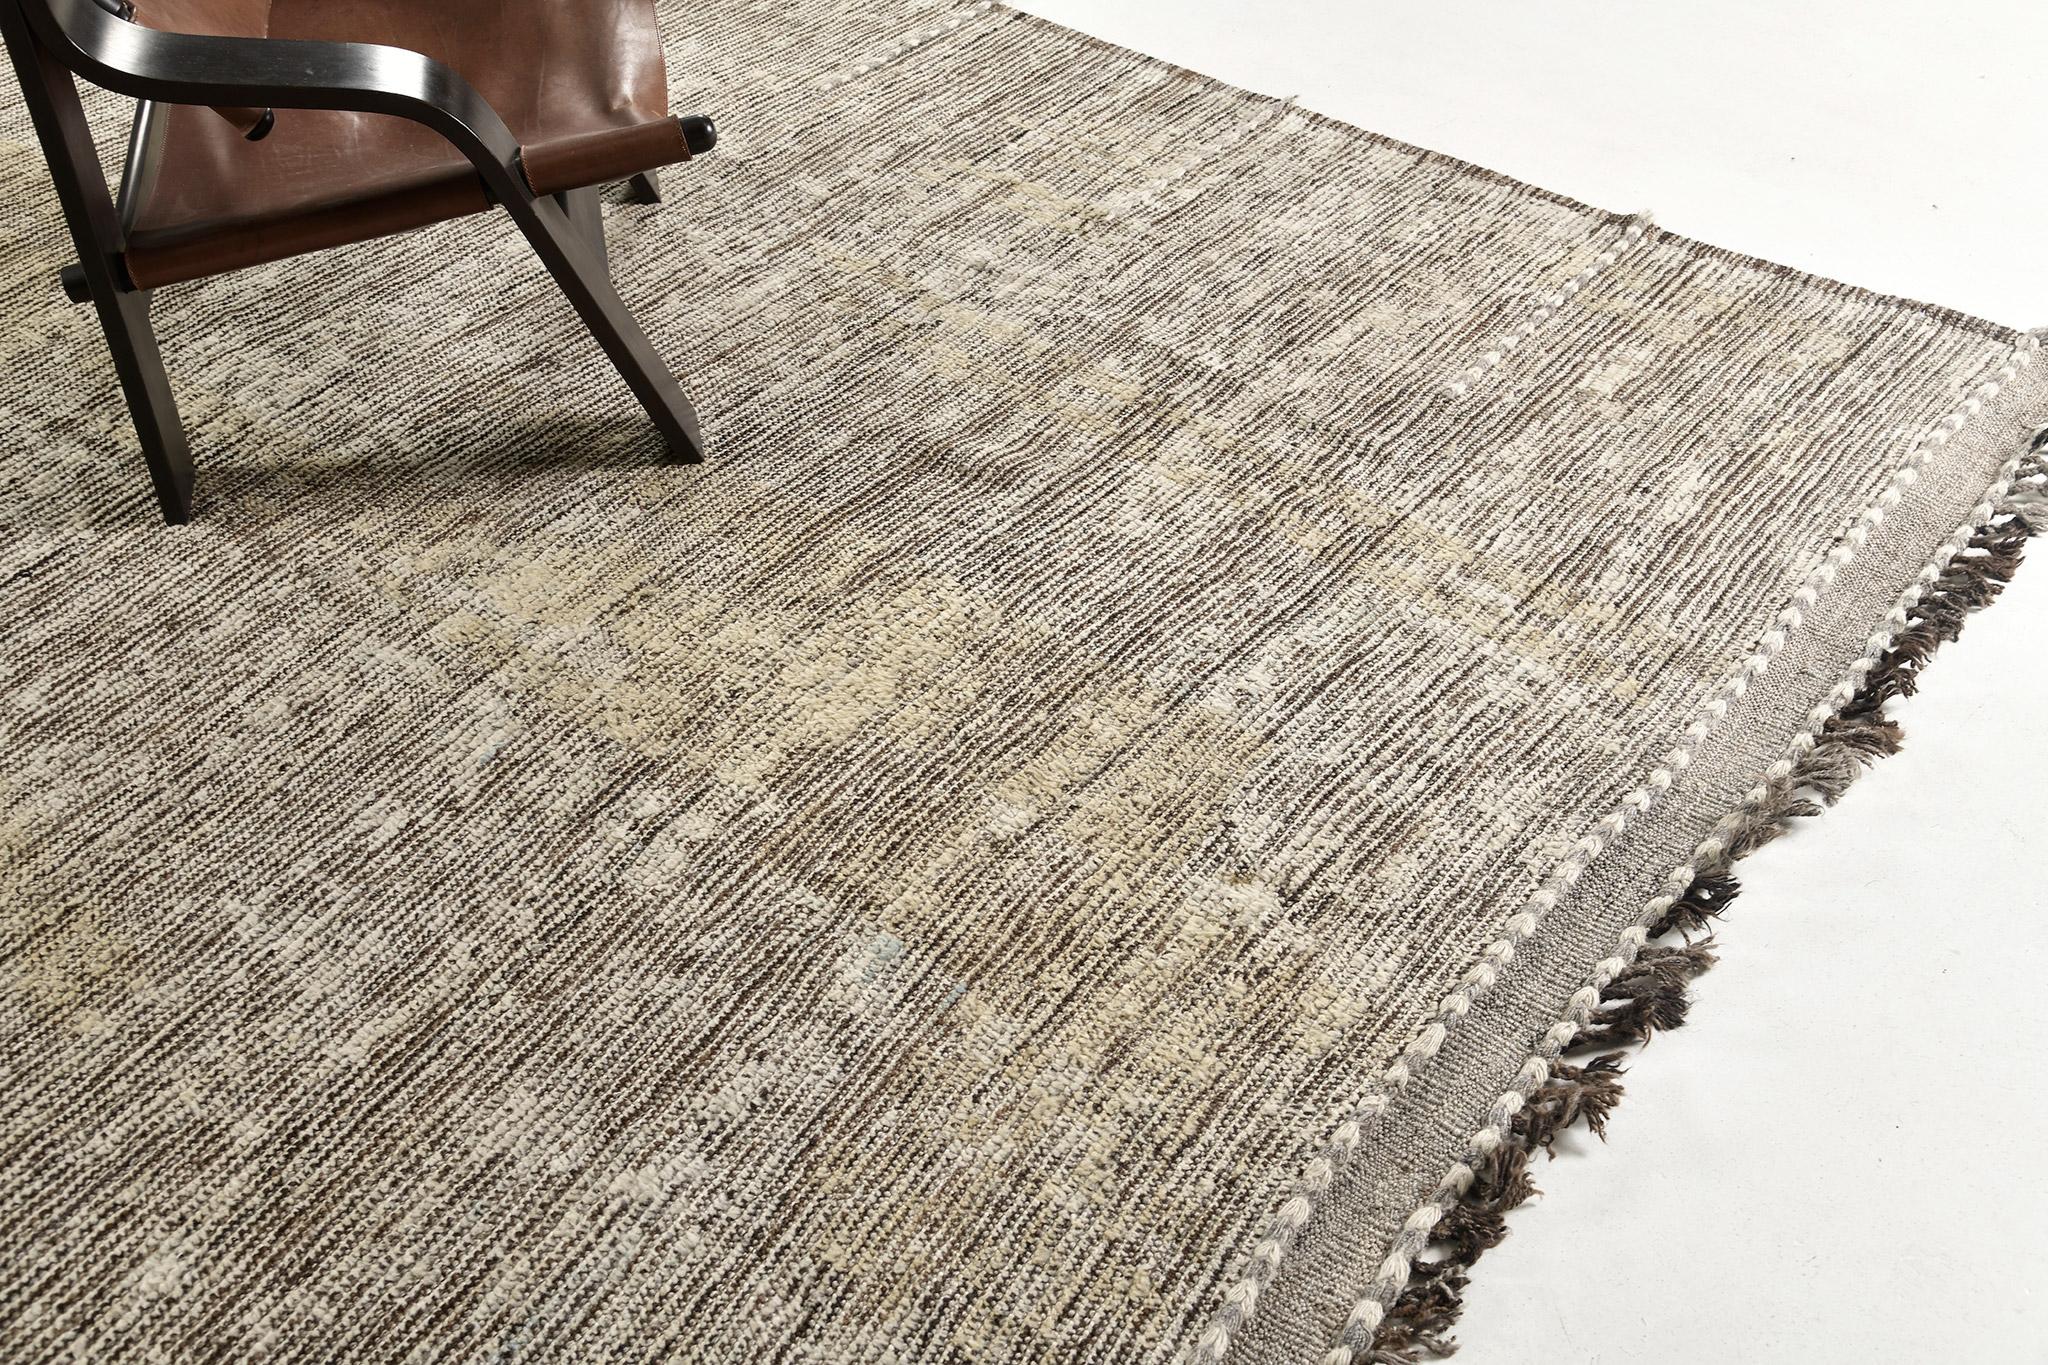 Nakhla is a natural earth-toned rug and a modern interpretation of the Moroccan world. These rugs' variegated tones of cream, brown, and gray resemble the fibers of nature and their ability to be used for crafts such as cords and basketry. Designed